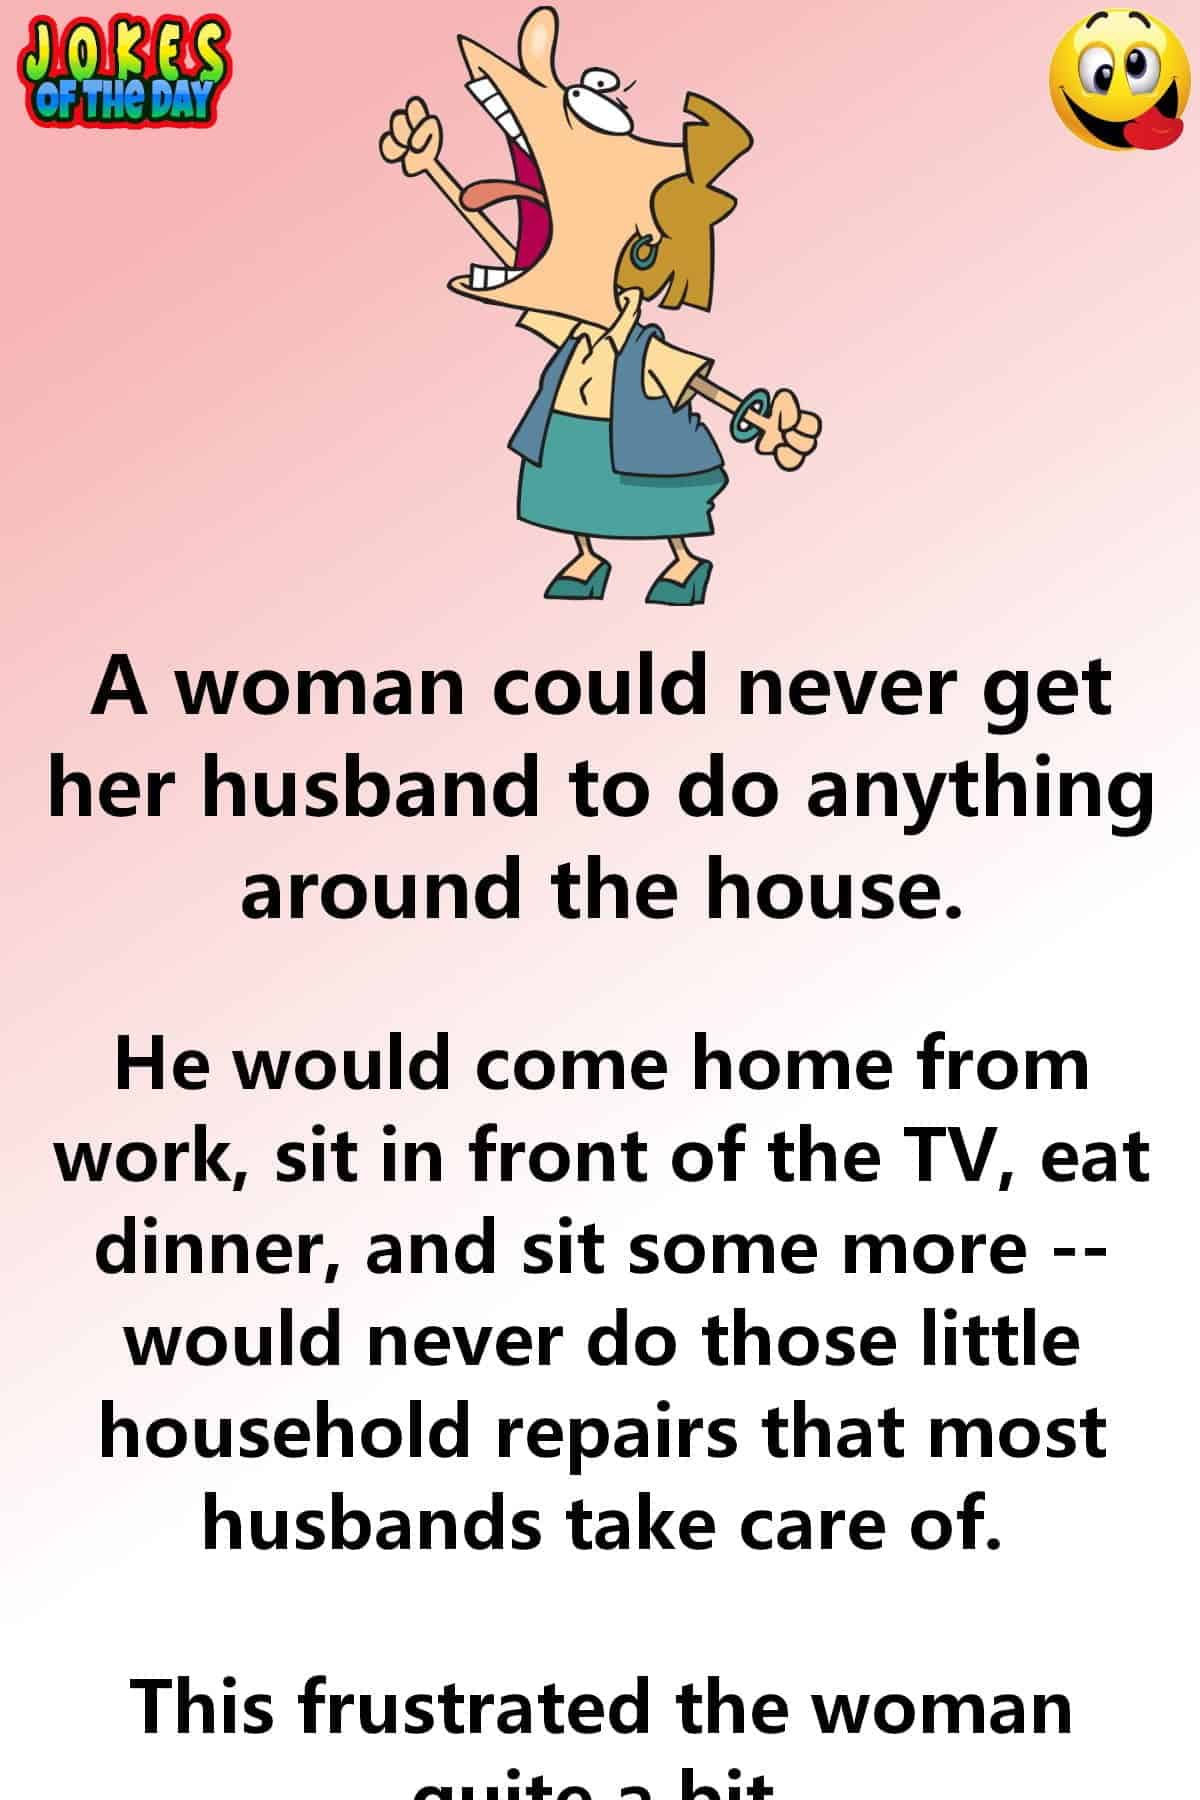 Joke - A woman could never get her husband to do anything around the house